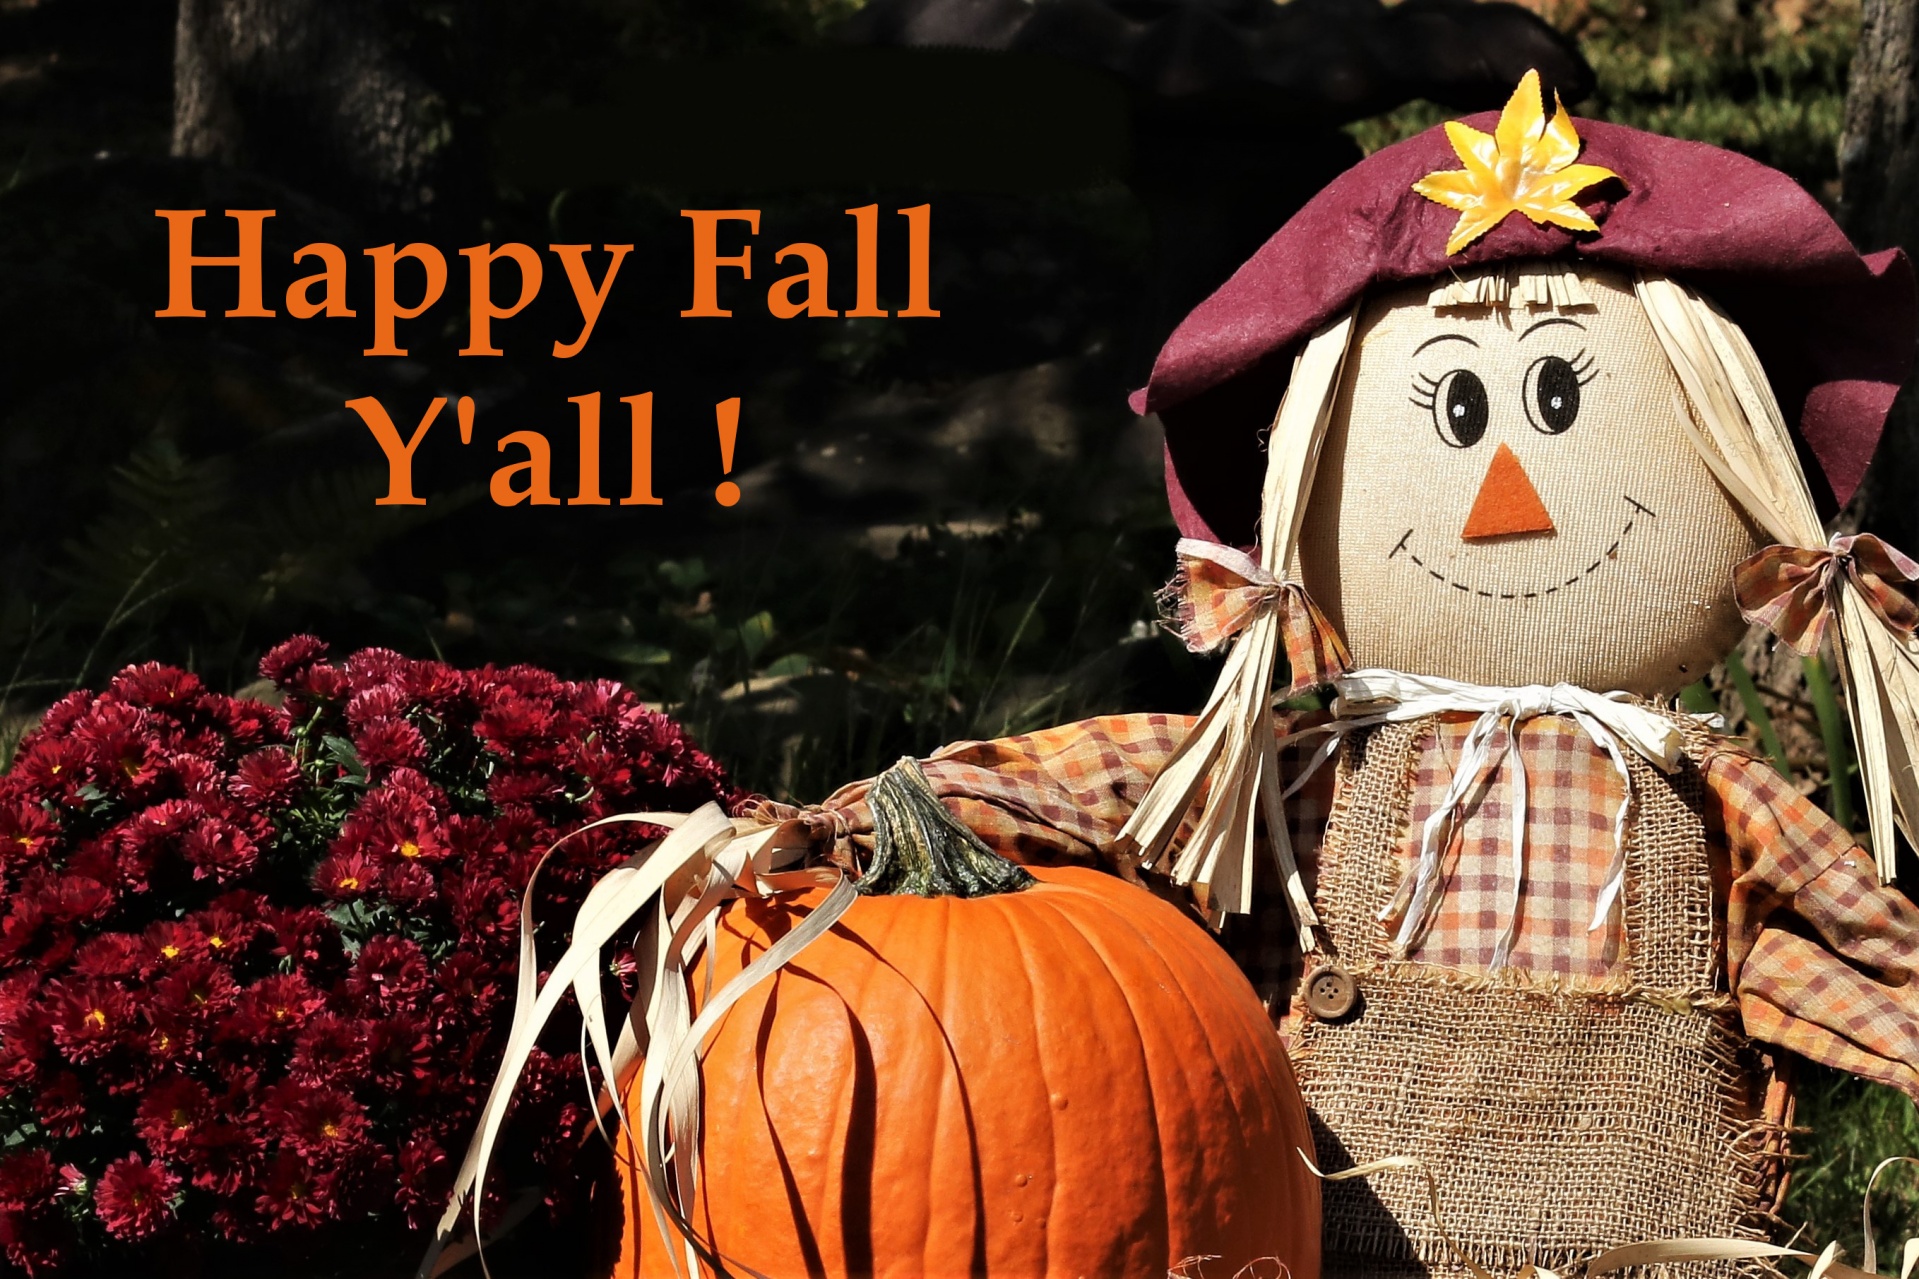 Close-up of a cute smiling girl scarecrow, beside a large orange pumpkin and red chrysanthemum flowers, with the text Happy Fall Y'all.